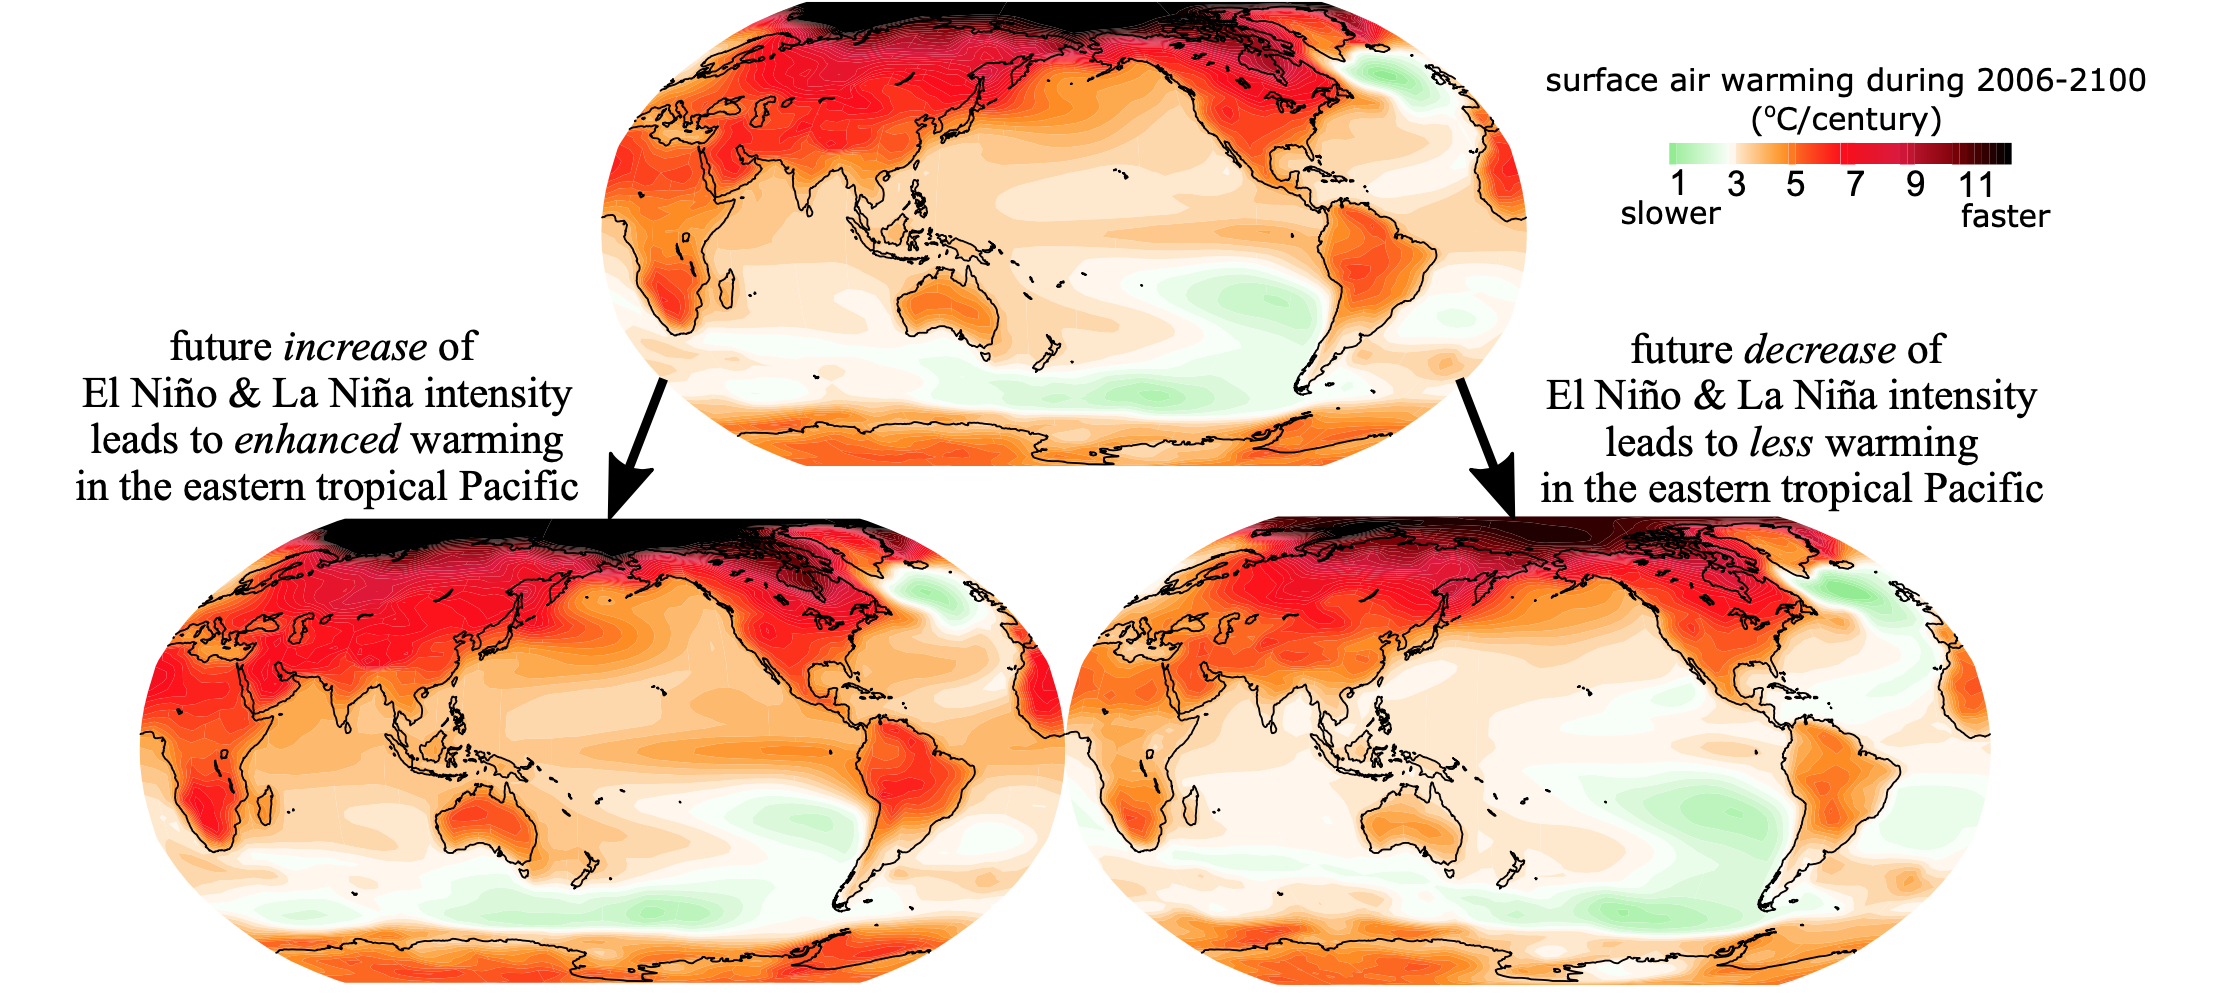 Three globes of Earth showing future increase of El Nino and La Nina intensity leads to enhances warming in the eastern tropical Pacific (bottom left). Future decrease of El Nino and La Nina intensity leads to less warming in the eastern tropical Pacific (bottom right).